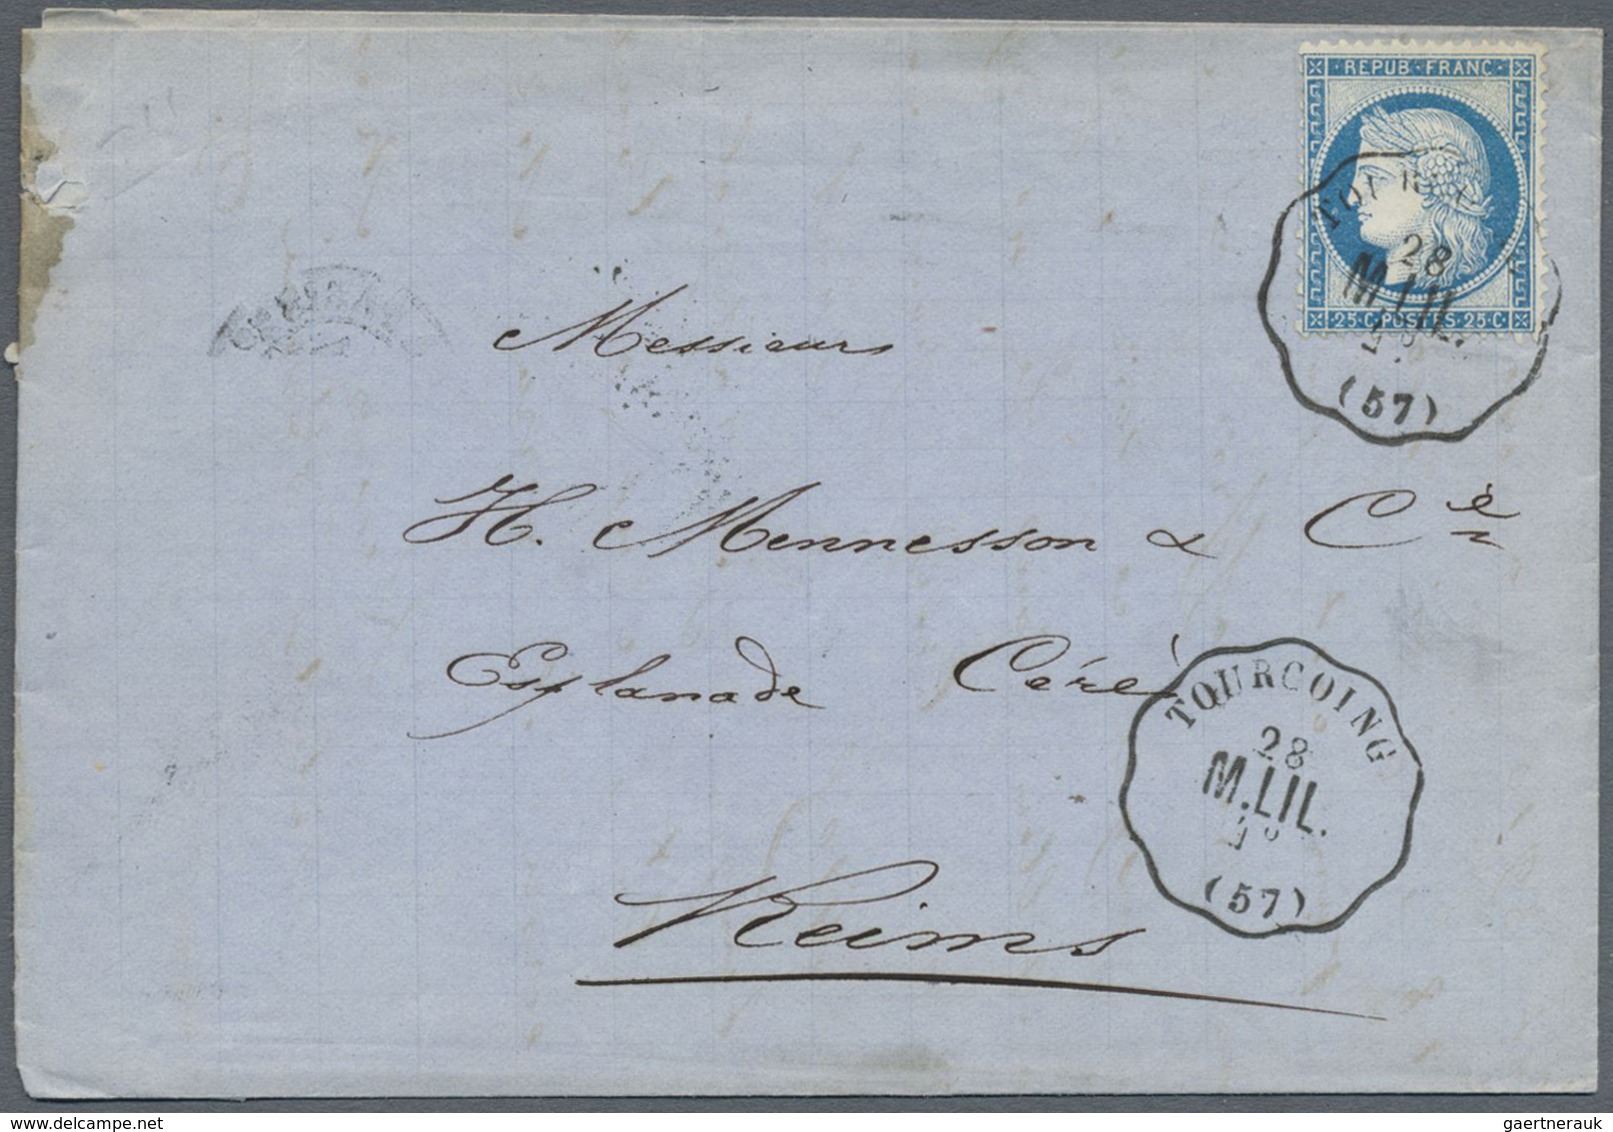 Br Frankreich: 1860/1970 (ca.), French Railway, accumulation of apprx. 230 covers/cards, varied conditi